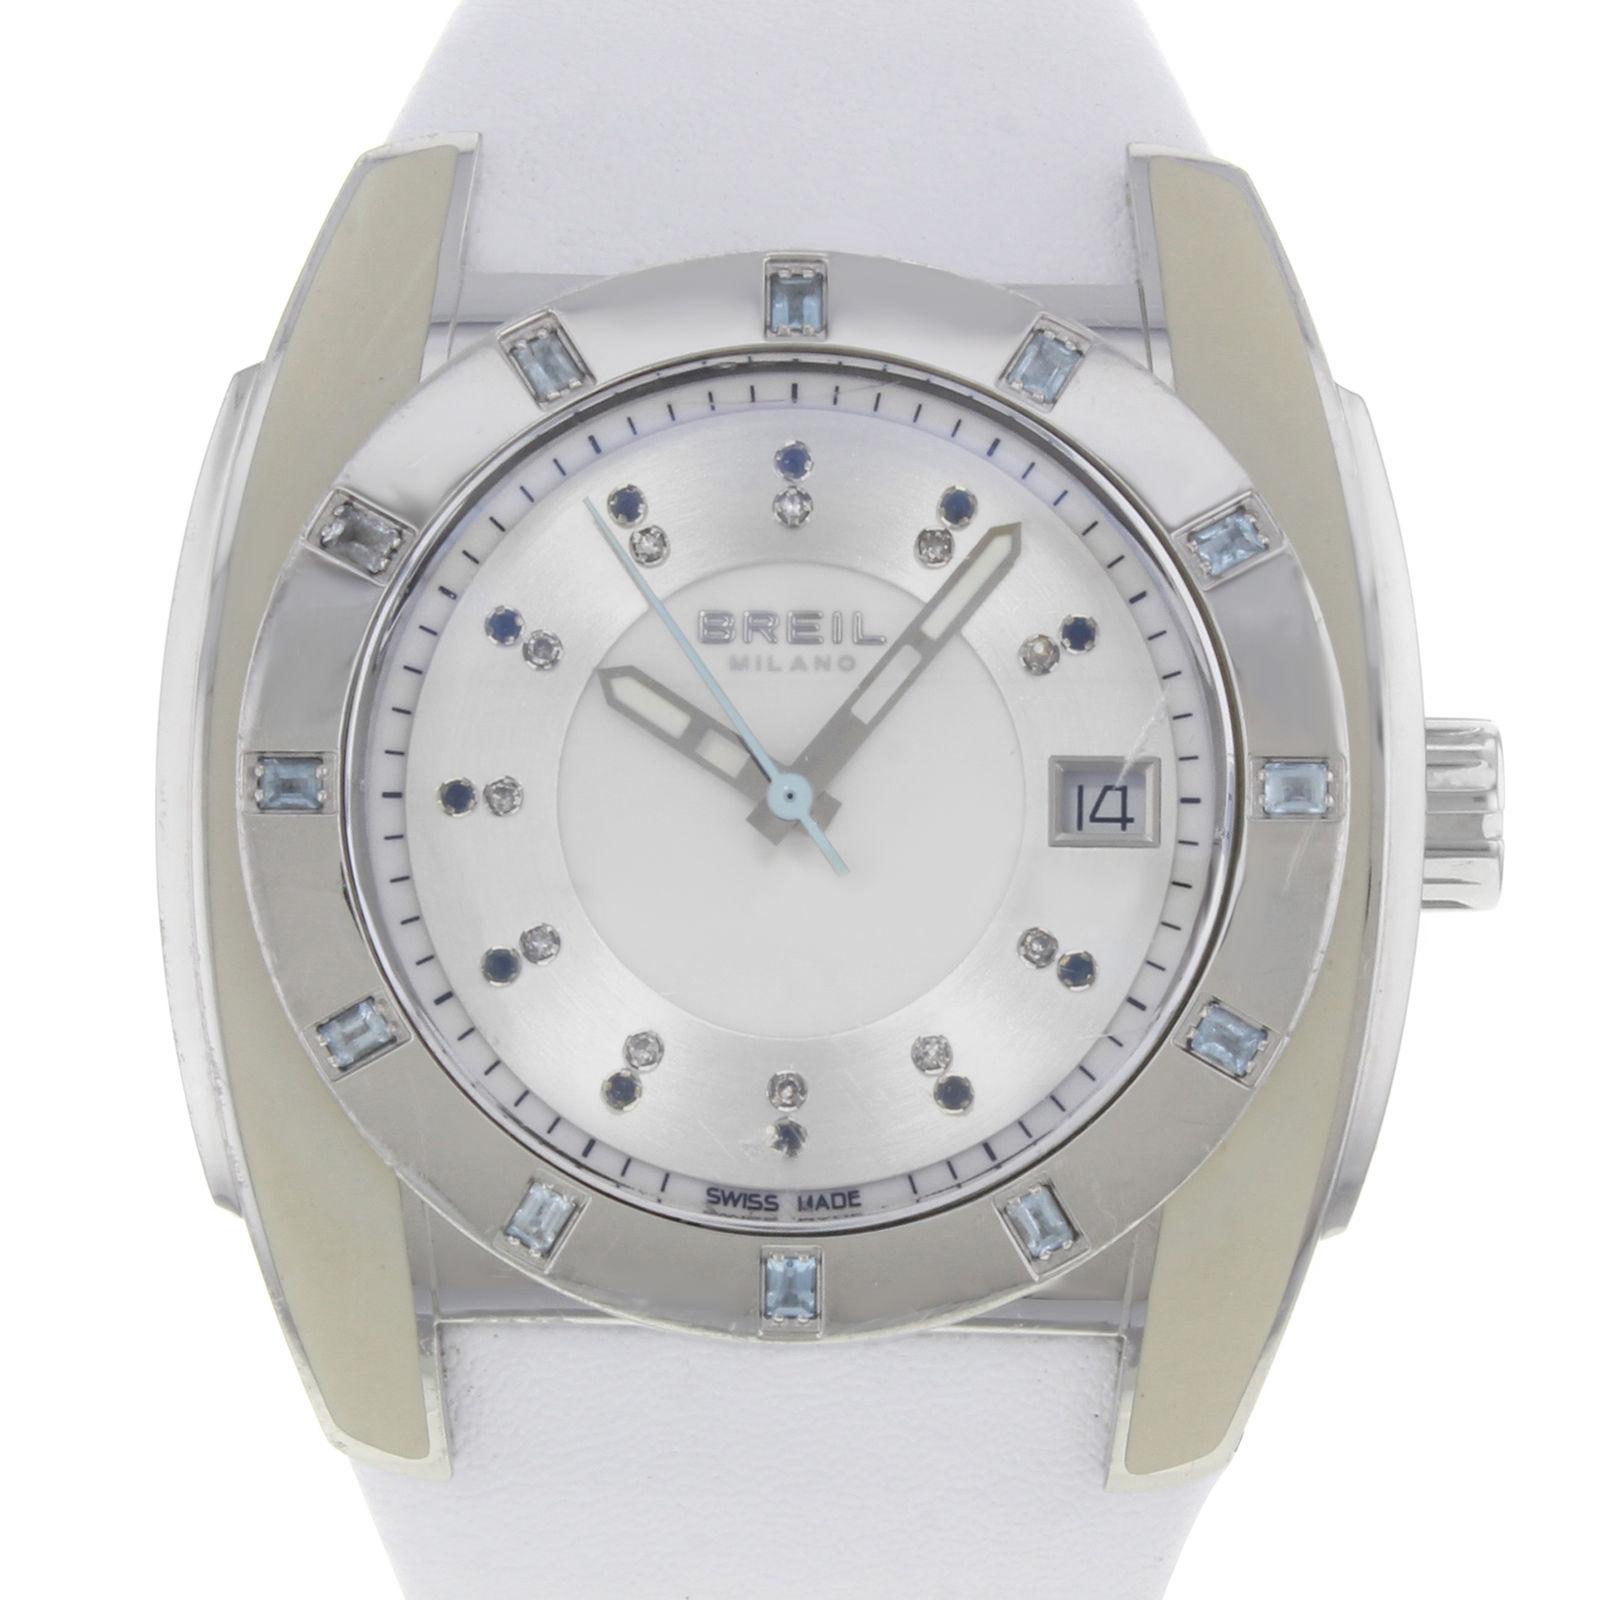 (15356)
This pre-owned Breil Milano BW0520 is a beautiful Womens timepiece that is powered by a quartz movement which is cased in a stainless steel case. It has a round shape face, date, diamonds dial and has hand diamonds style markers. It is